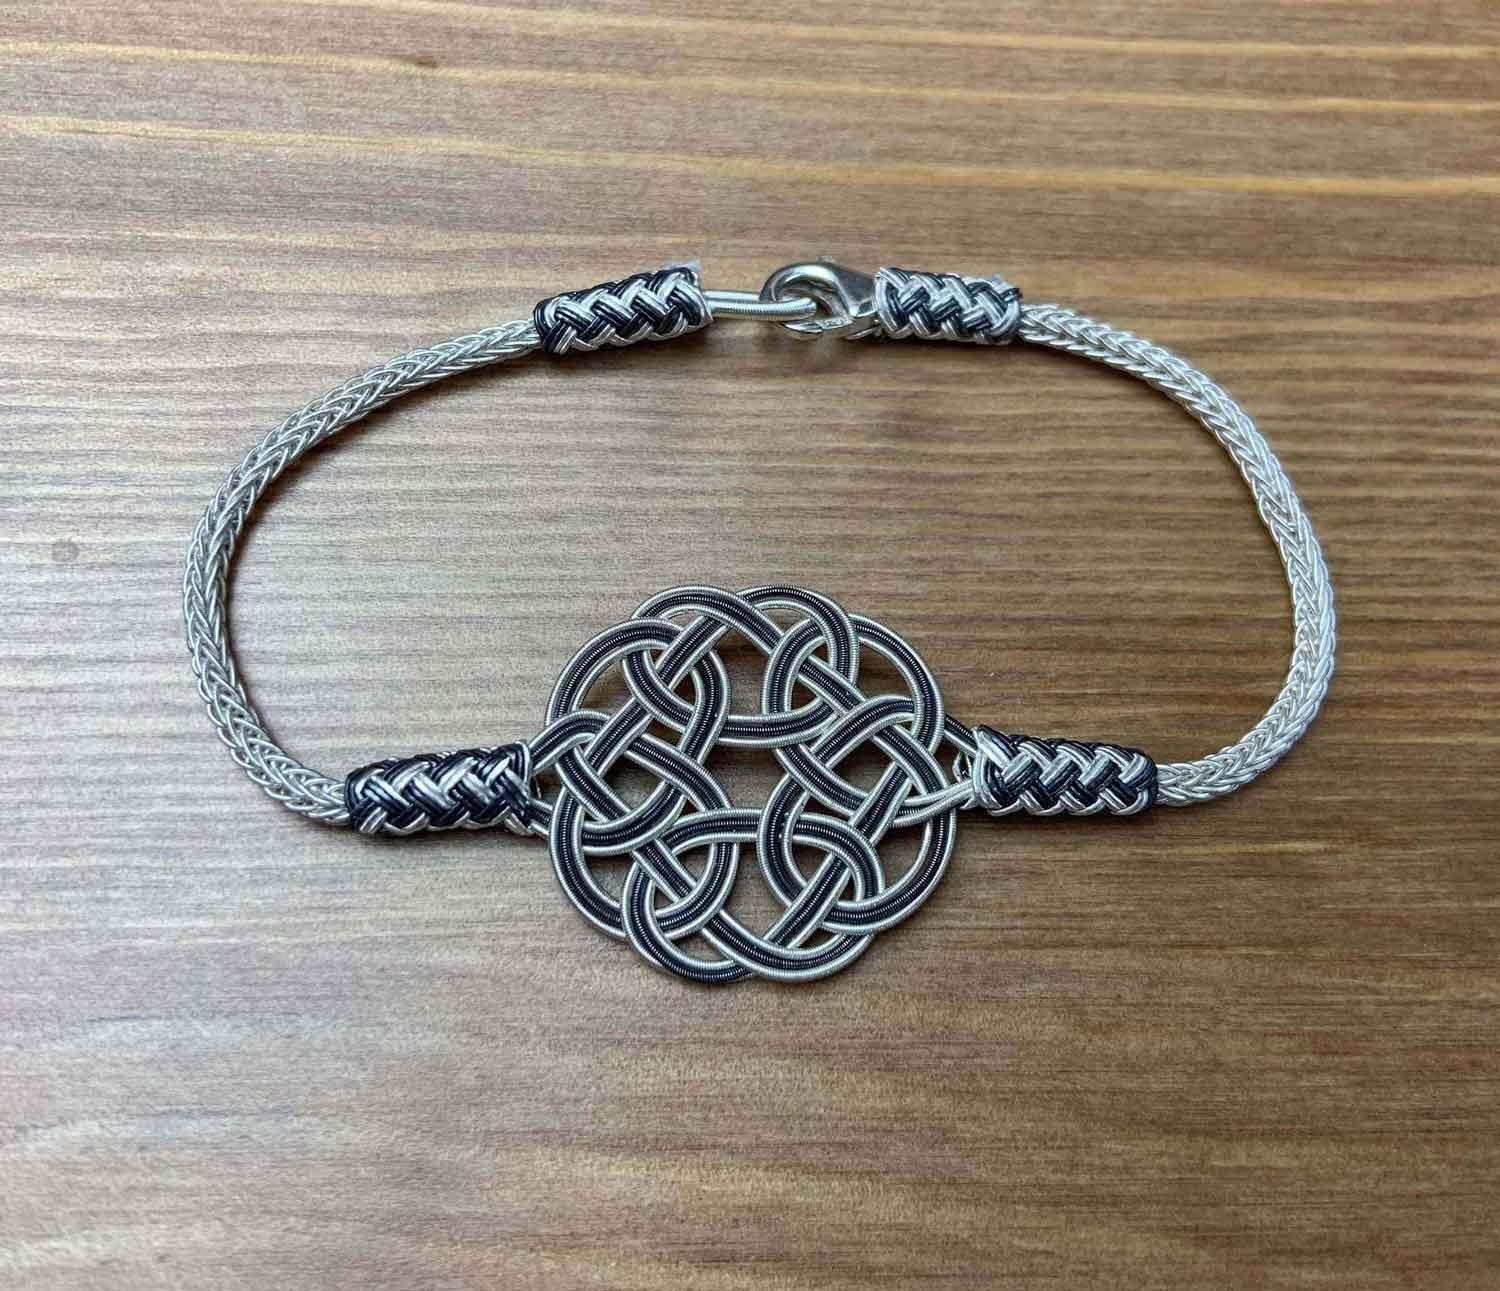 Stylish Celtic Knot Braided Bracelet - Elegant Handcrafted Silver Accessory Wonderful Gift available at Moyoni Design